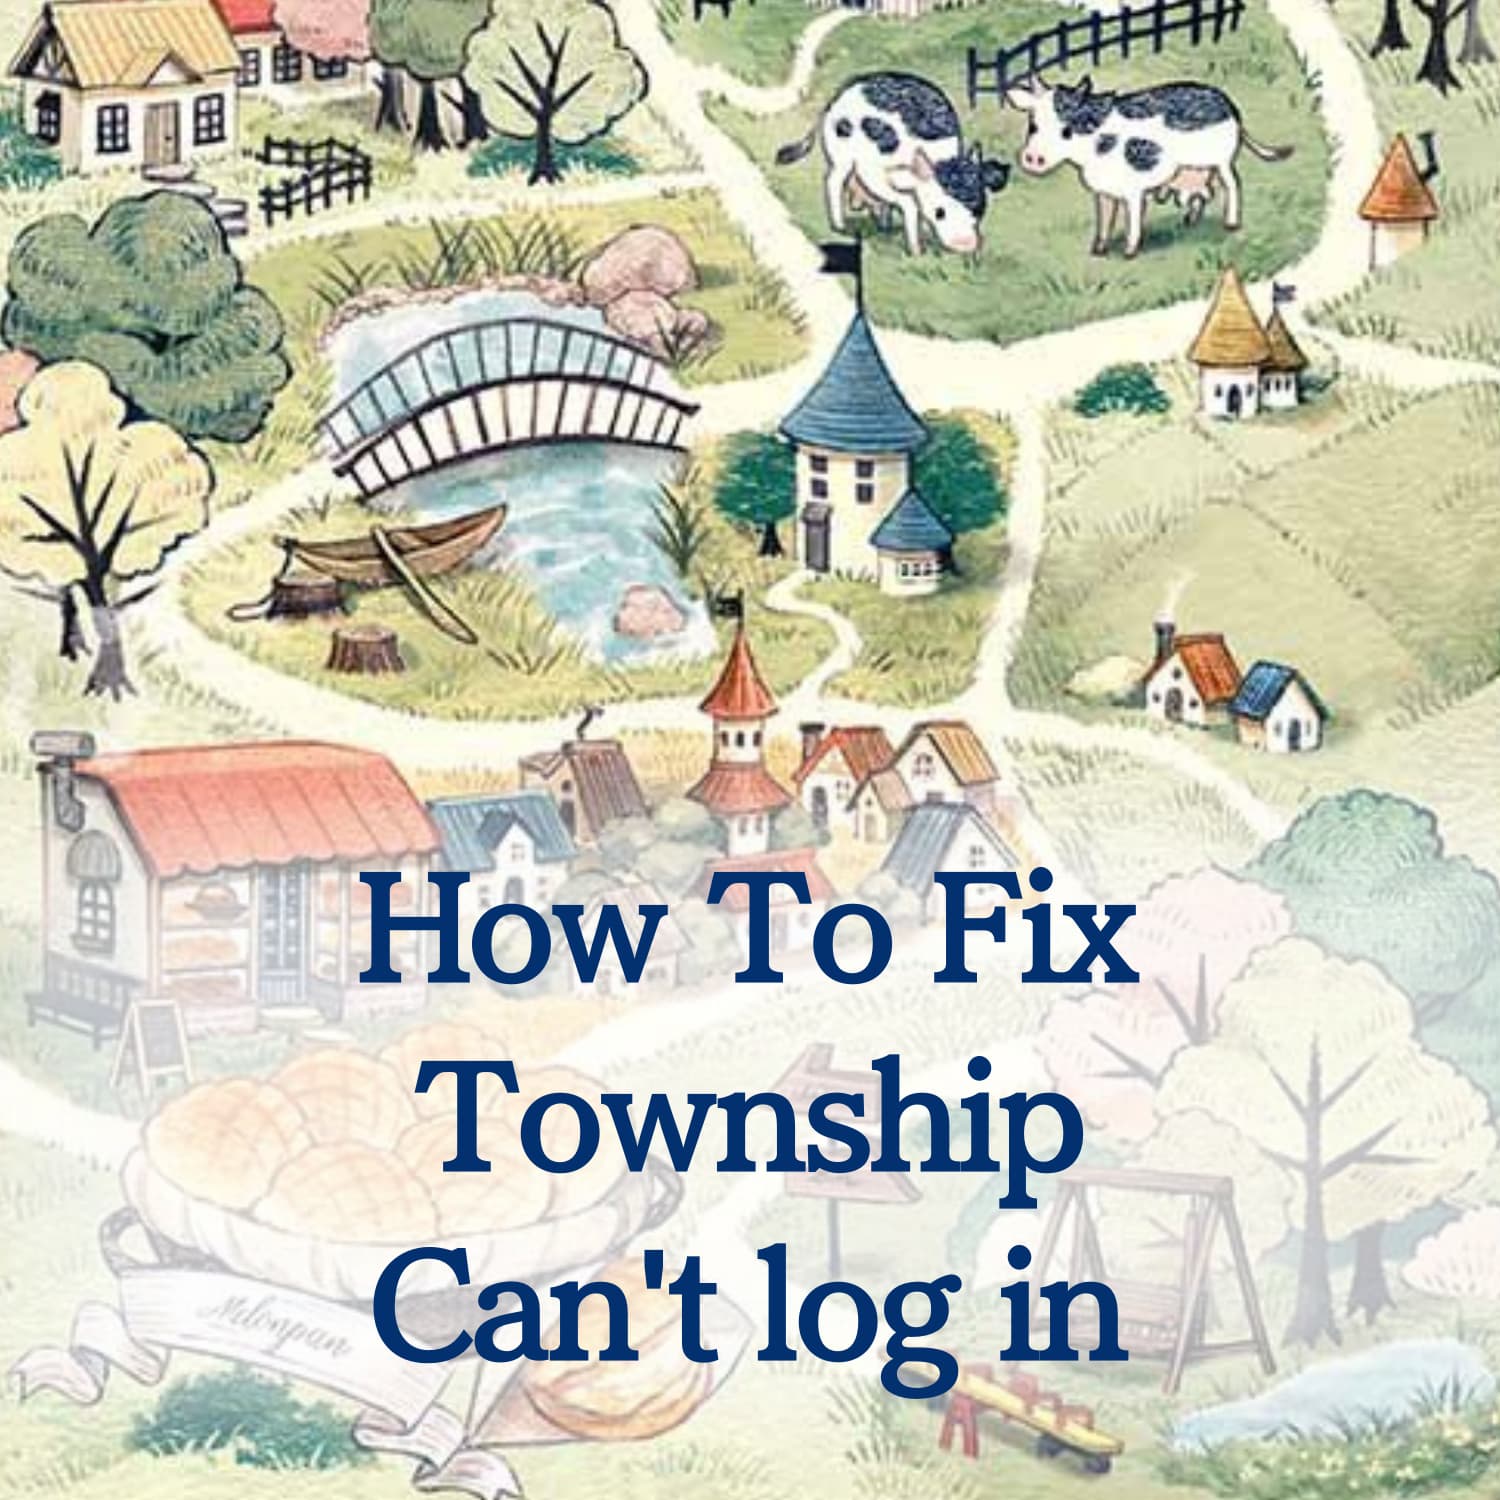 How To Fix Township Can't log in